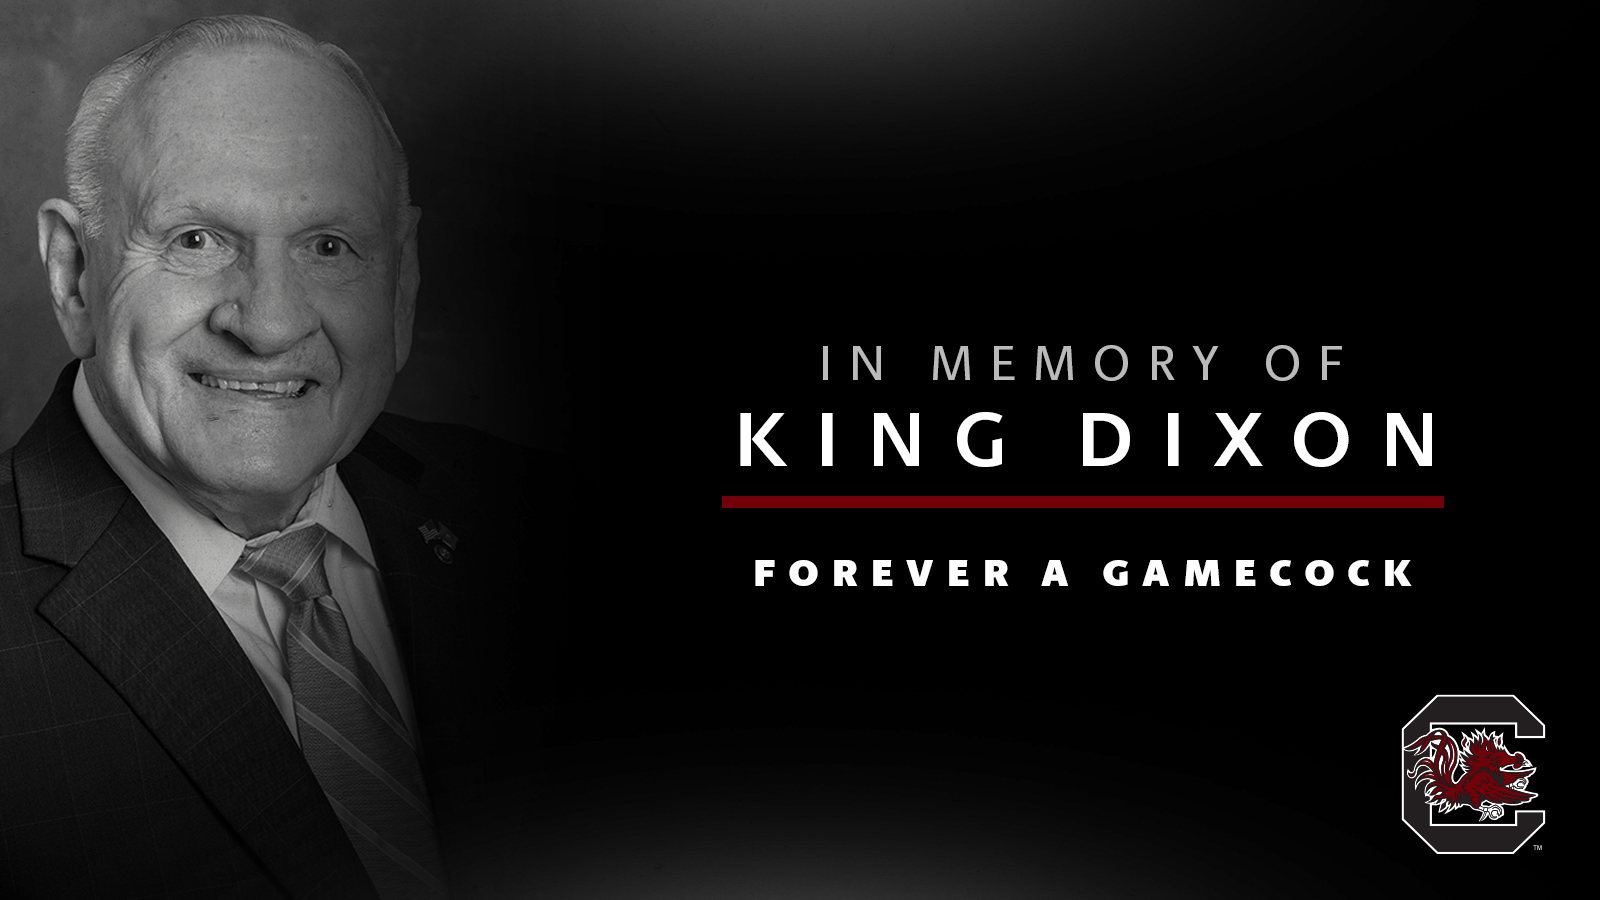 The Gamecocks mourn the passing of King Dixon